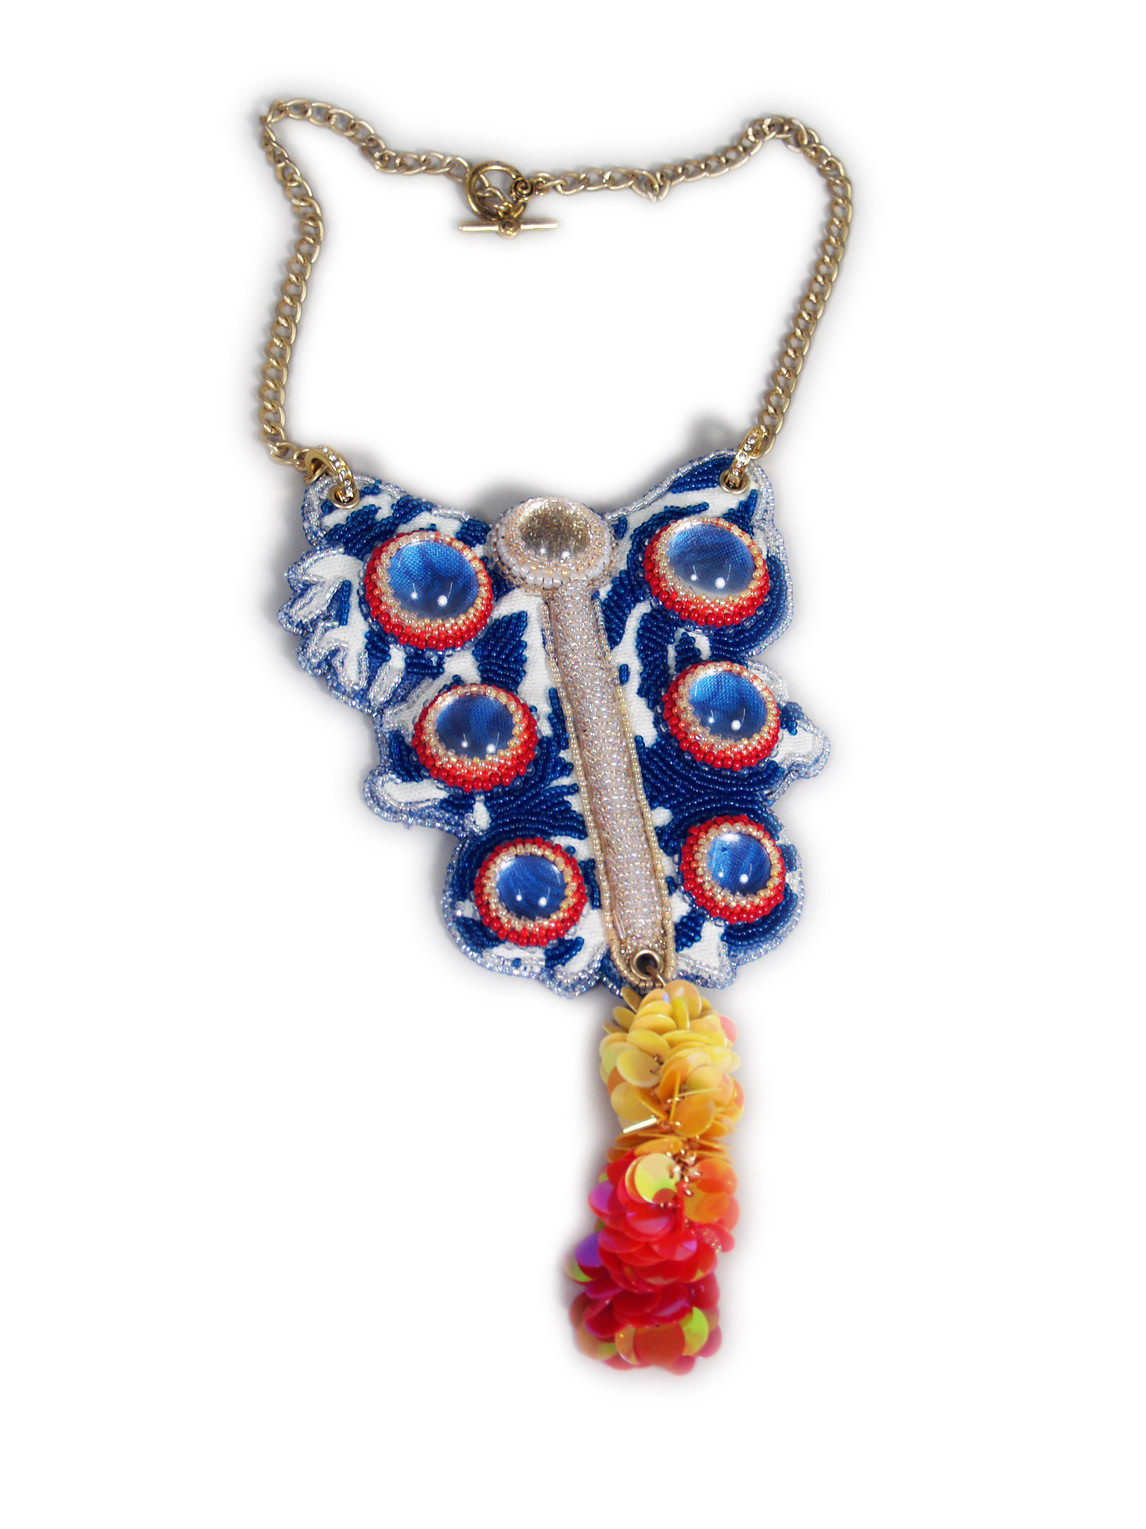 fiery  Colony  marrus  orthocanna  blue  red  acrylic  cabochon  Seed  bead  fabric  canvas  leather chain